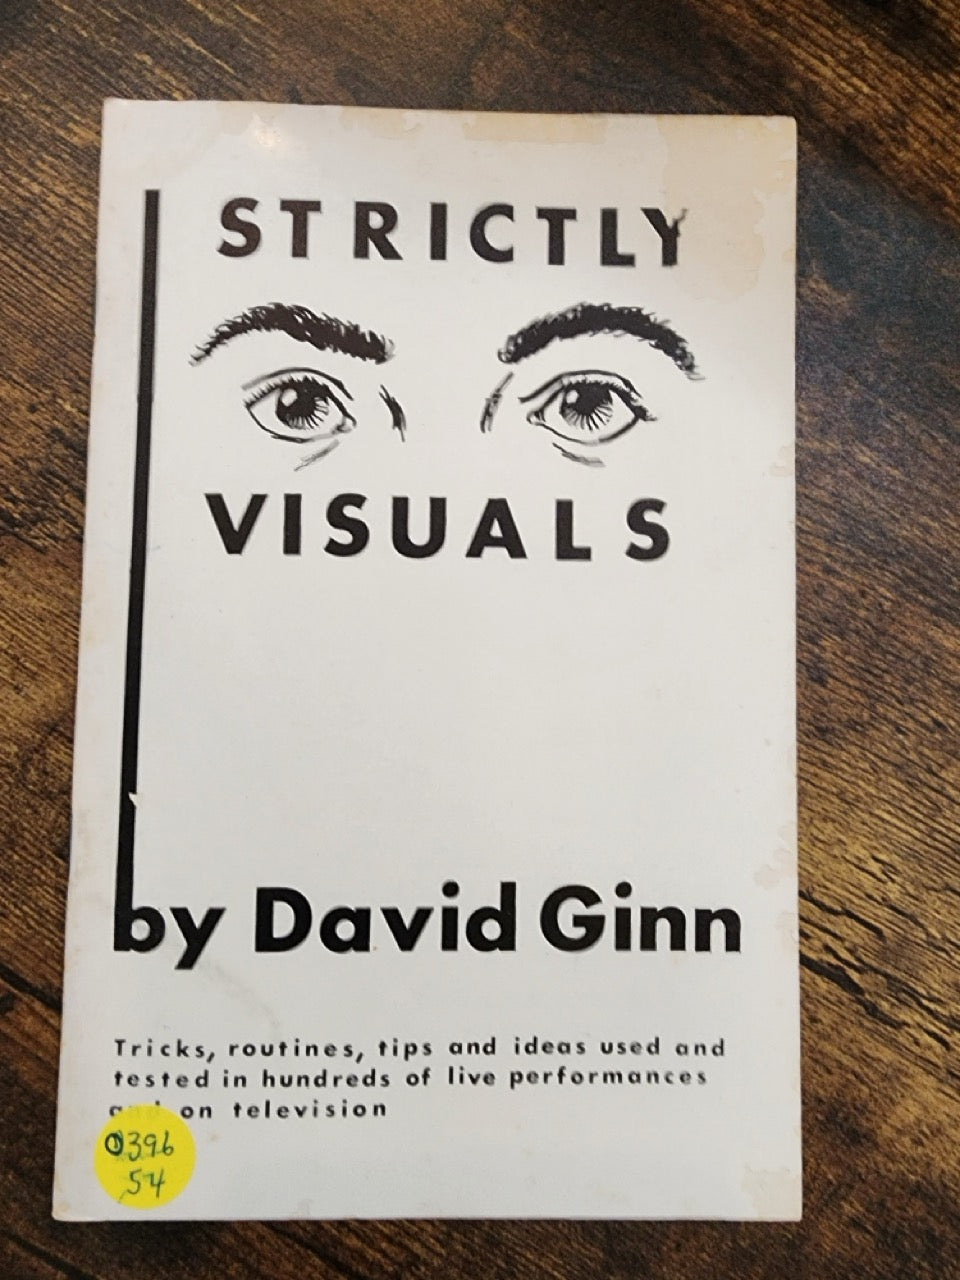 Strictly Visuals 1 & 2 - David Ginn (#2 is Signed)